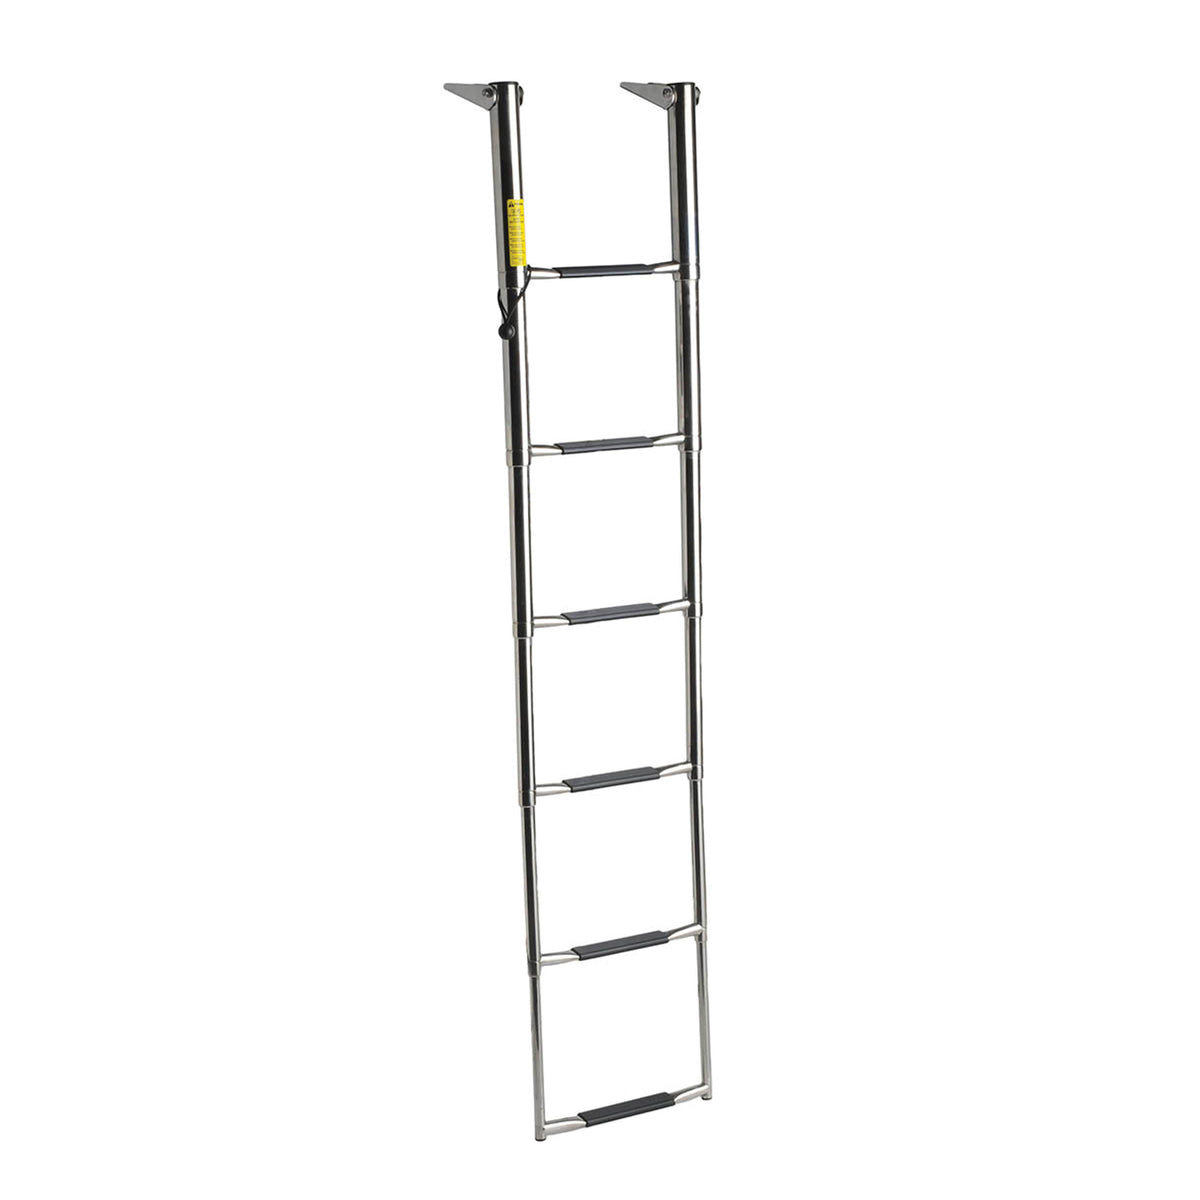 Garelick 19686 Over-Transom Wide Body Telescoping Ladder - 6 Step